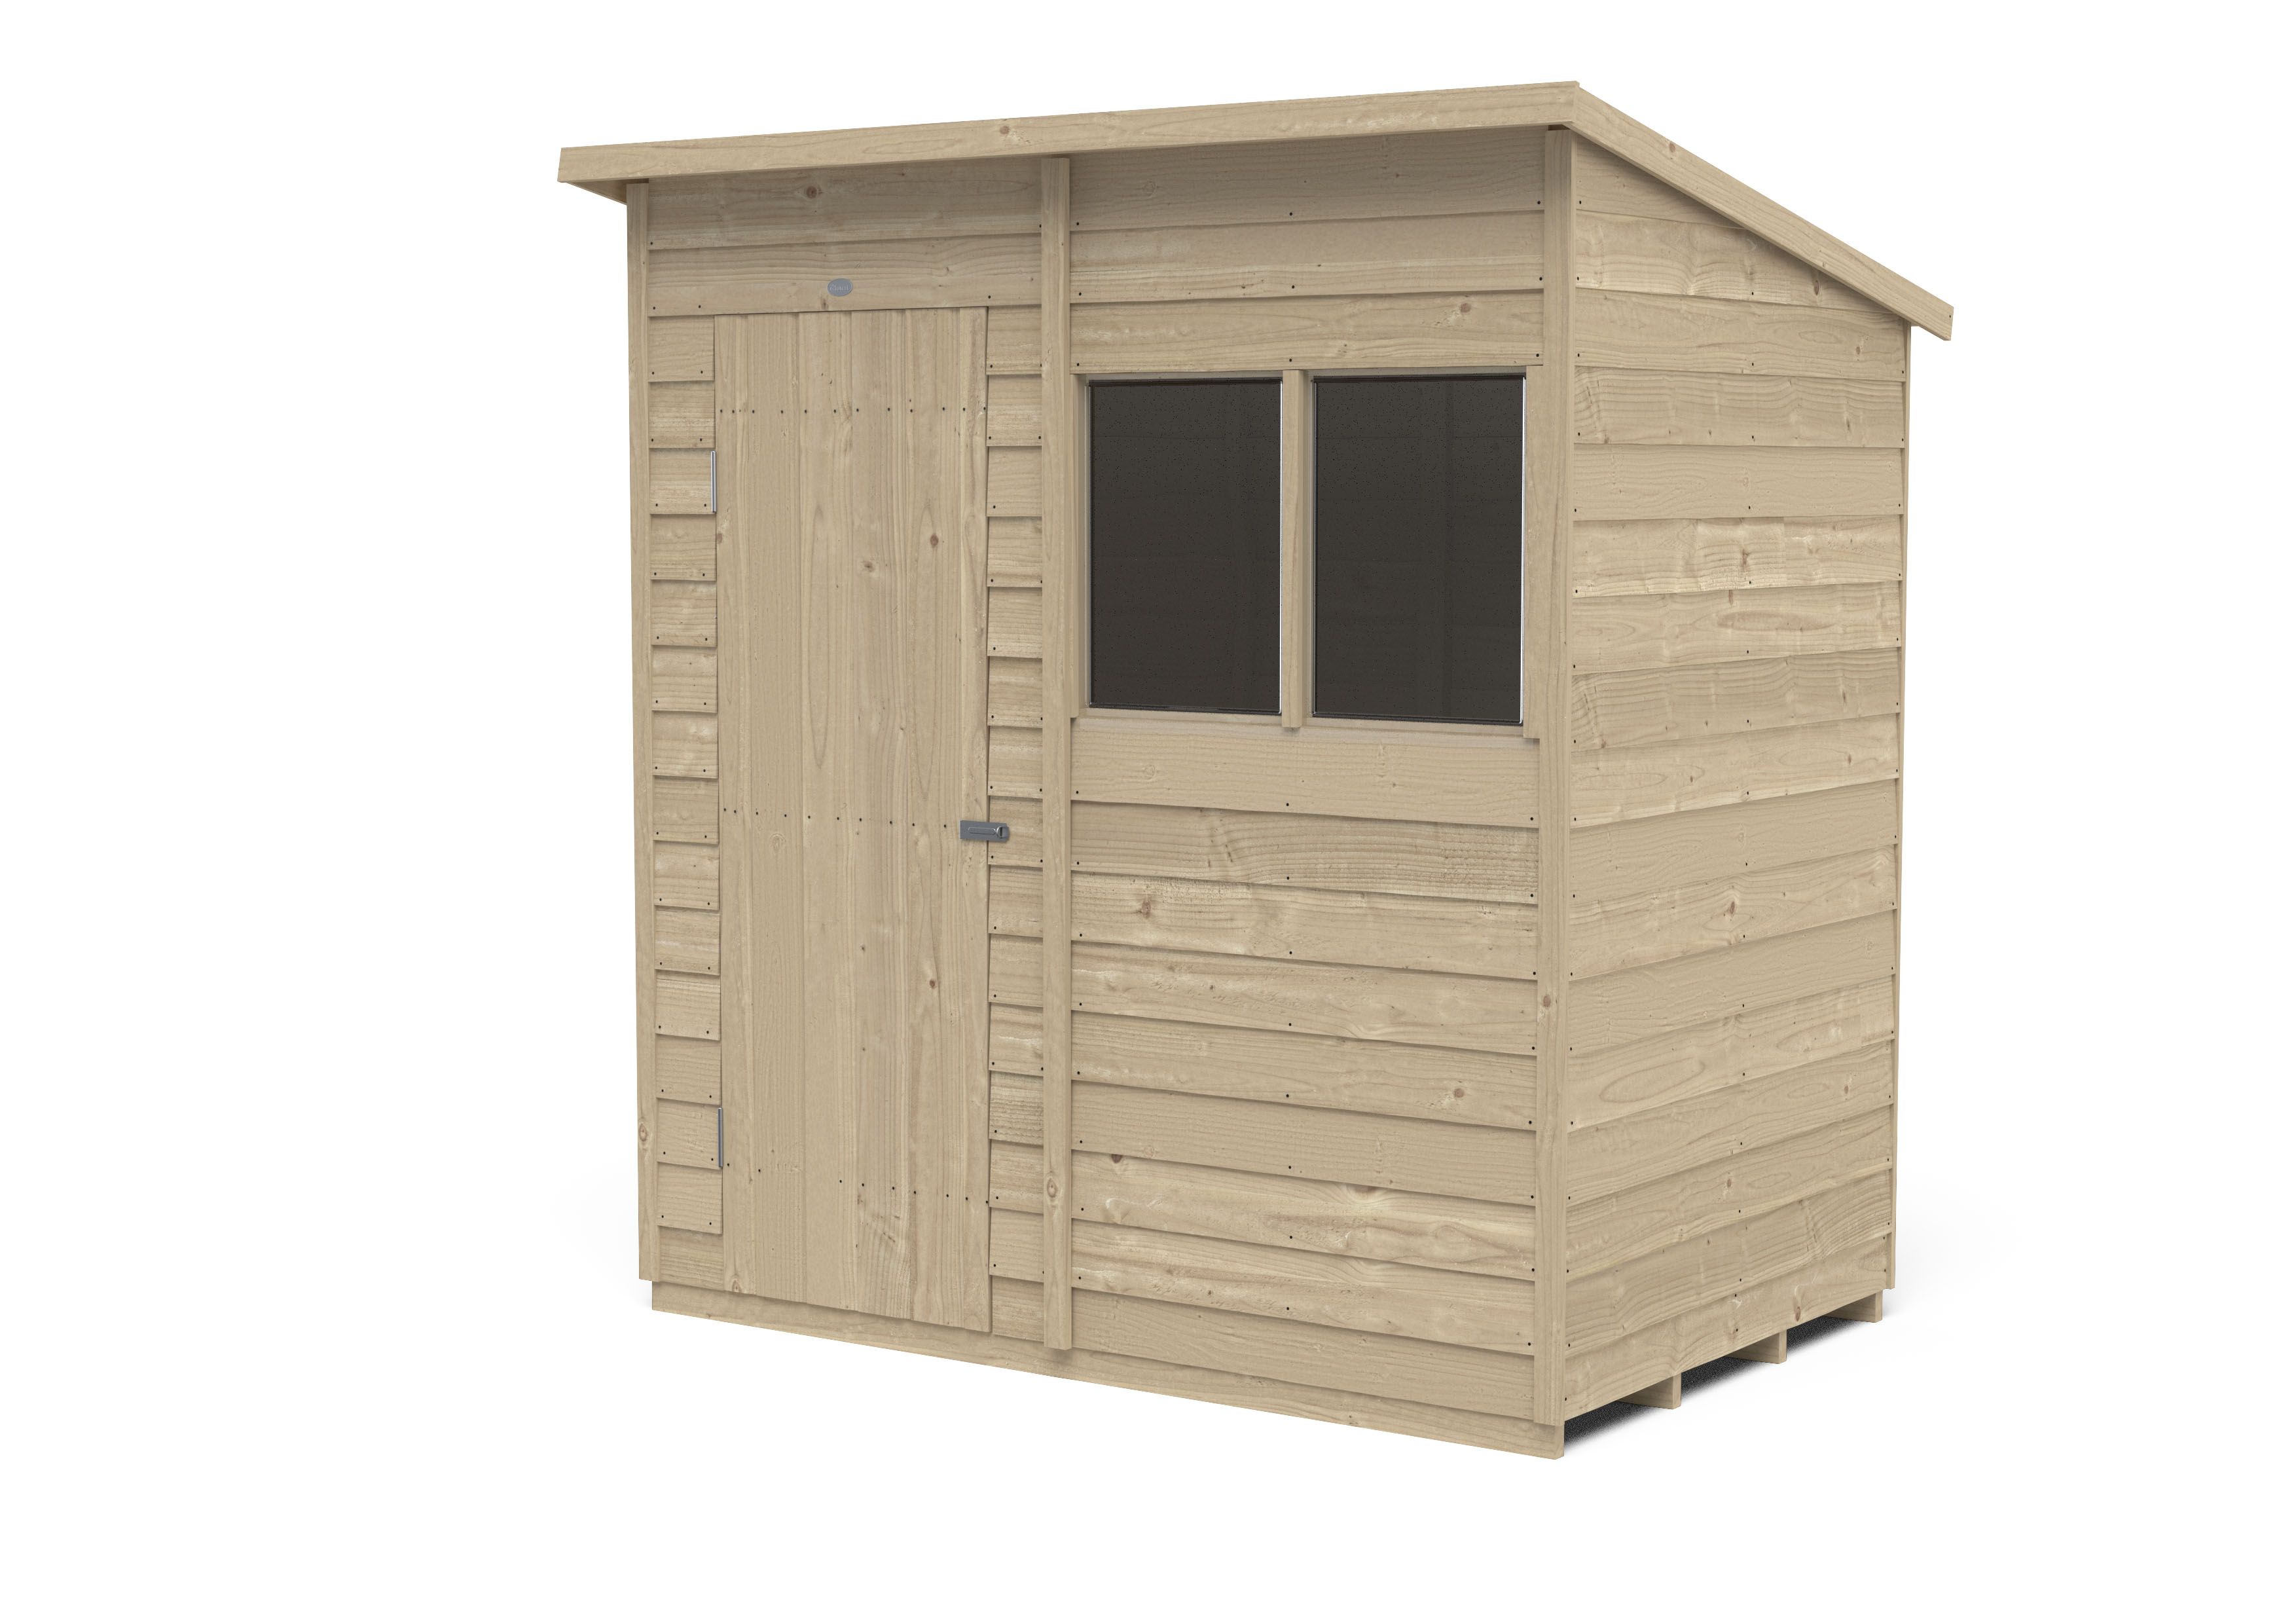 Forest Garden Overlap 6x4 ft Pent Wooden Pressure treated Shed with floor & 2 windows (Base included) - Assembly service included